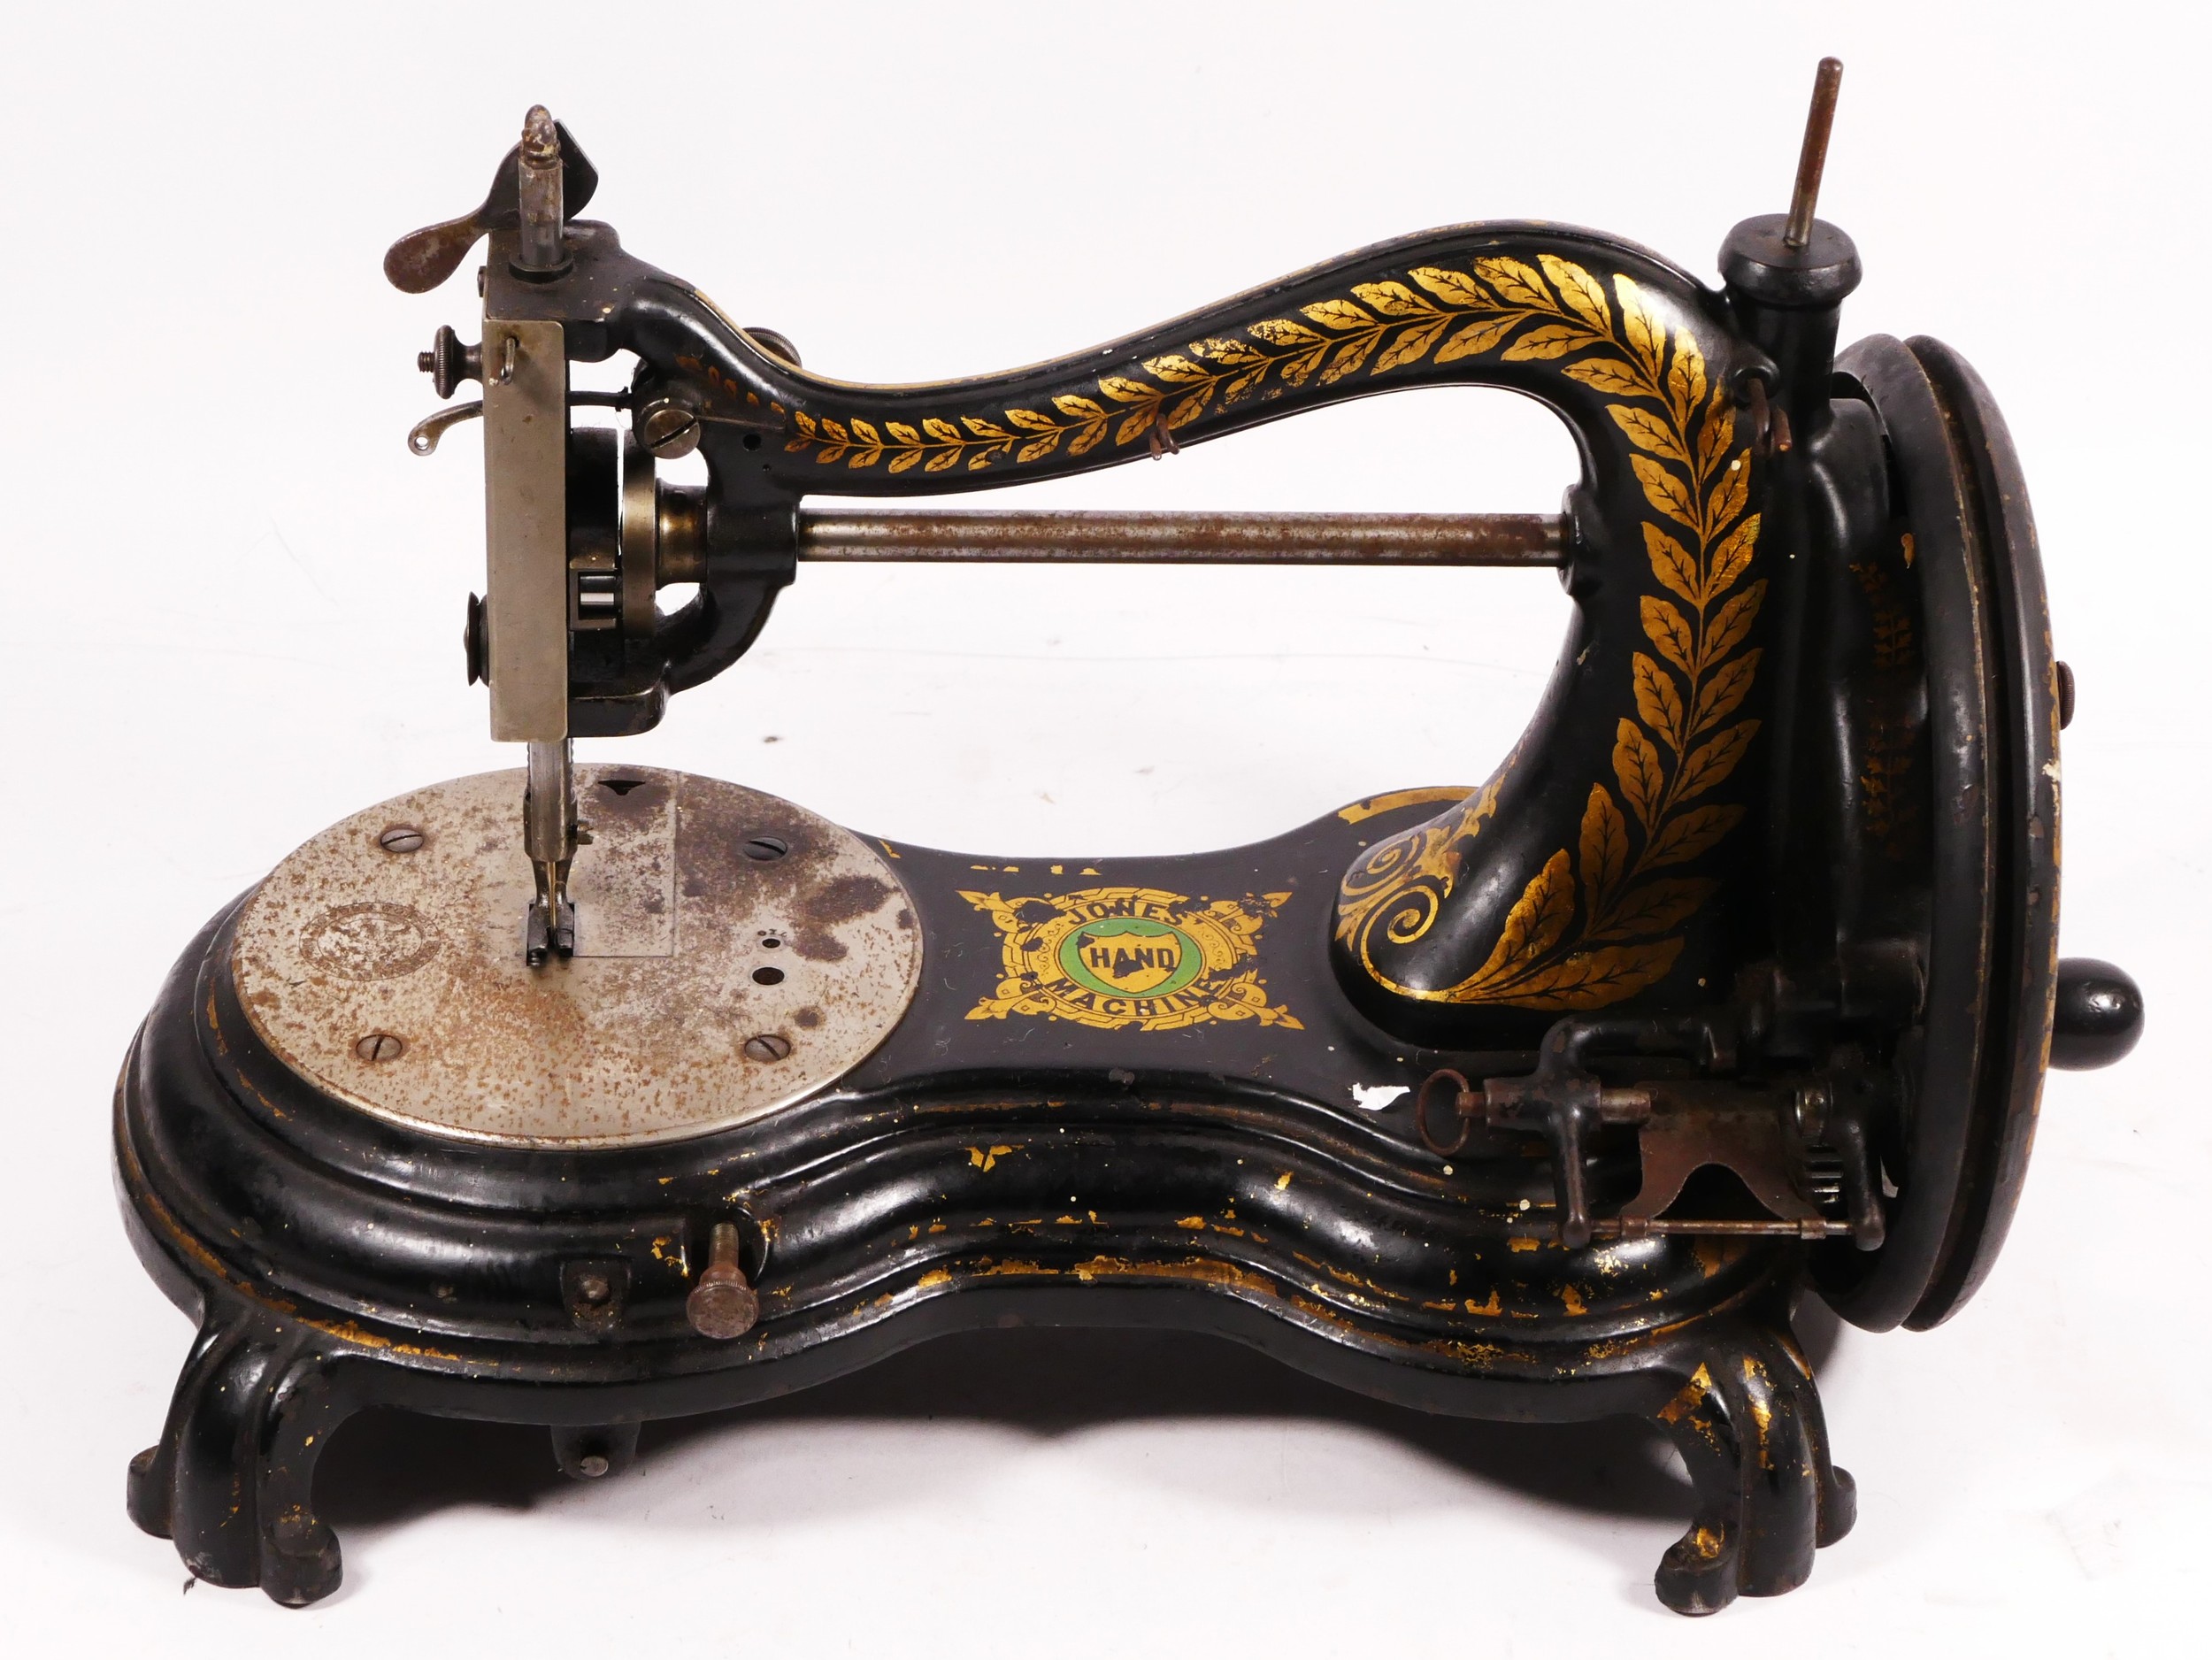 A Jones hand sewing machine, serpentine/cat back, with gilt floral decoration, 38cm long - Image 3 of 7